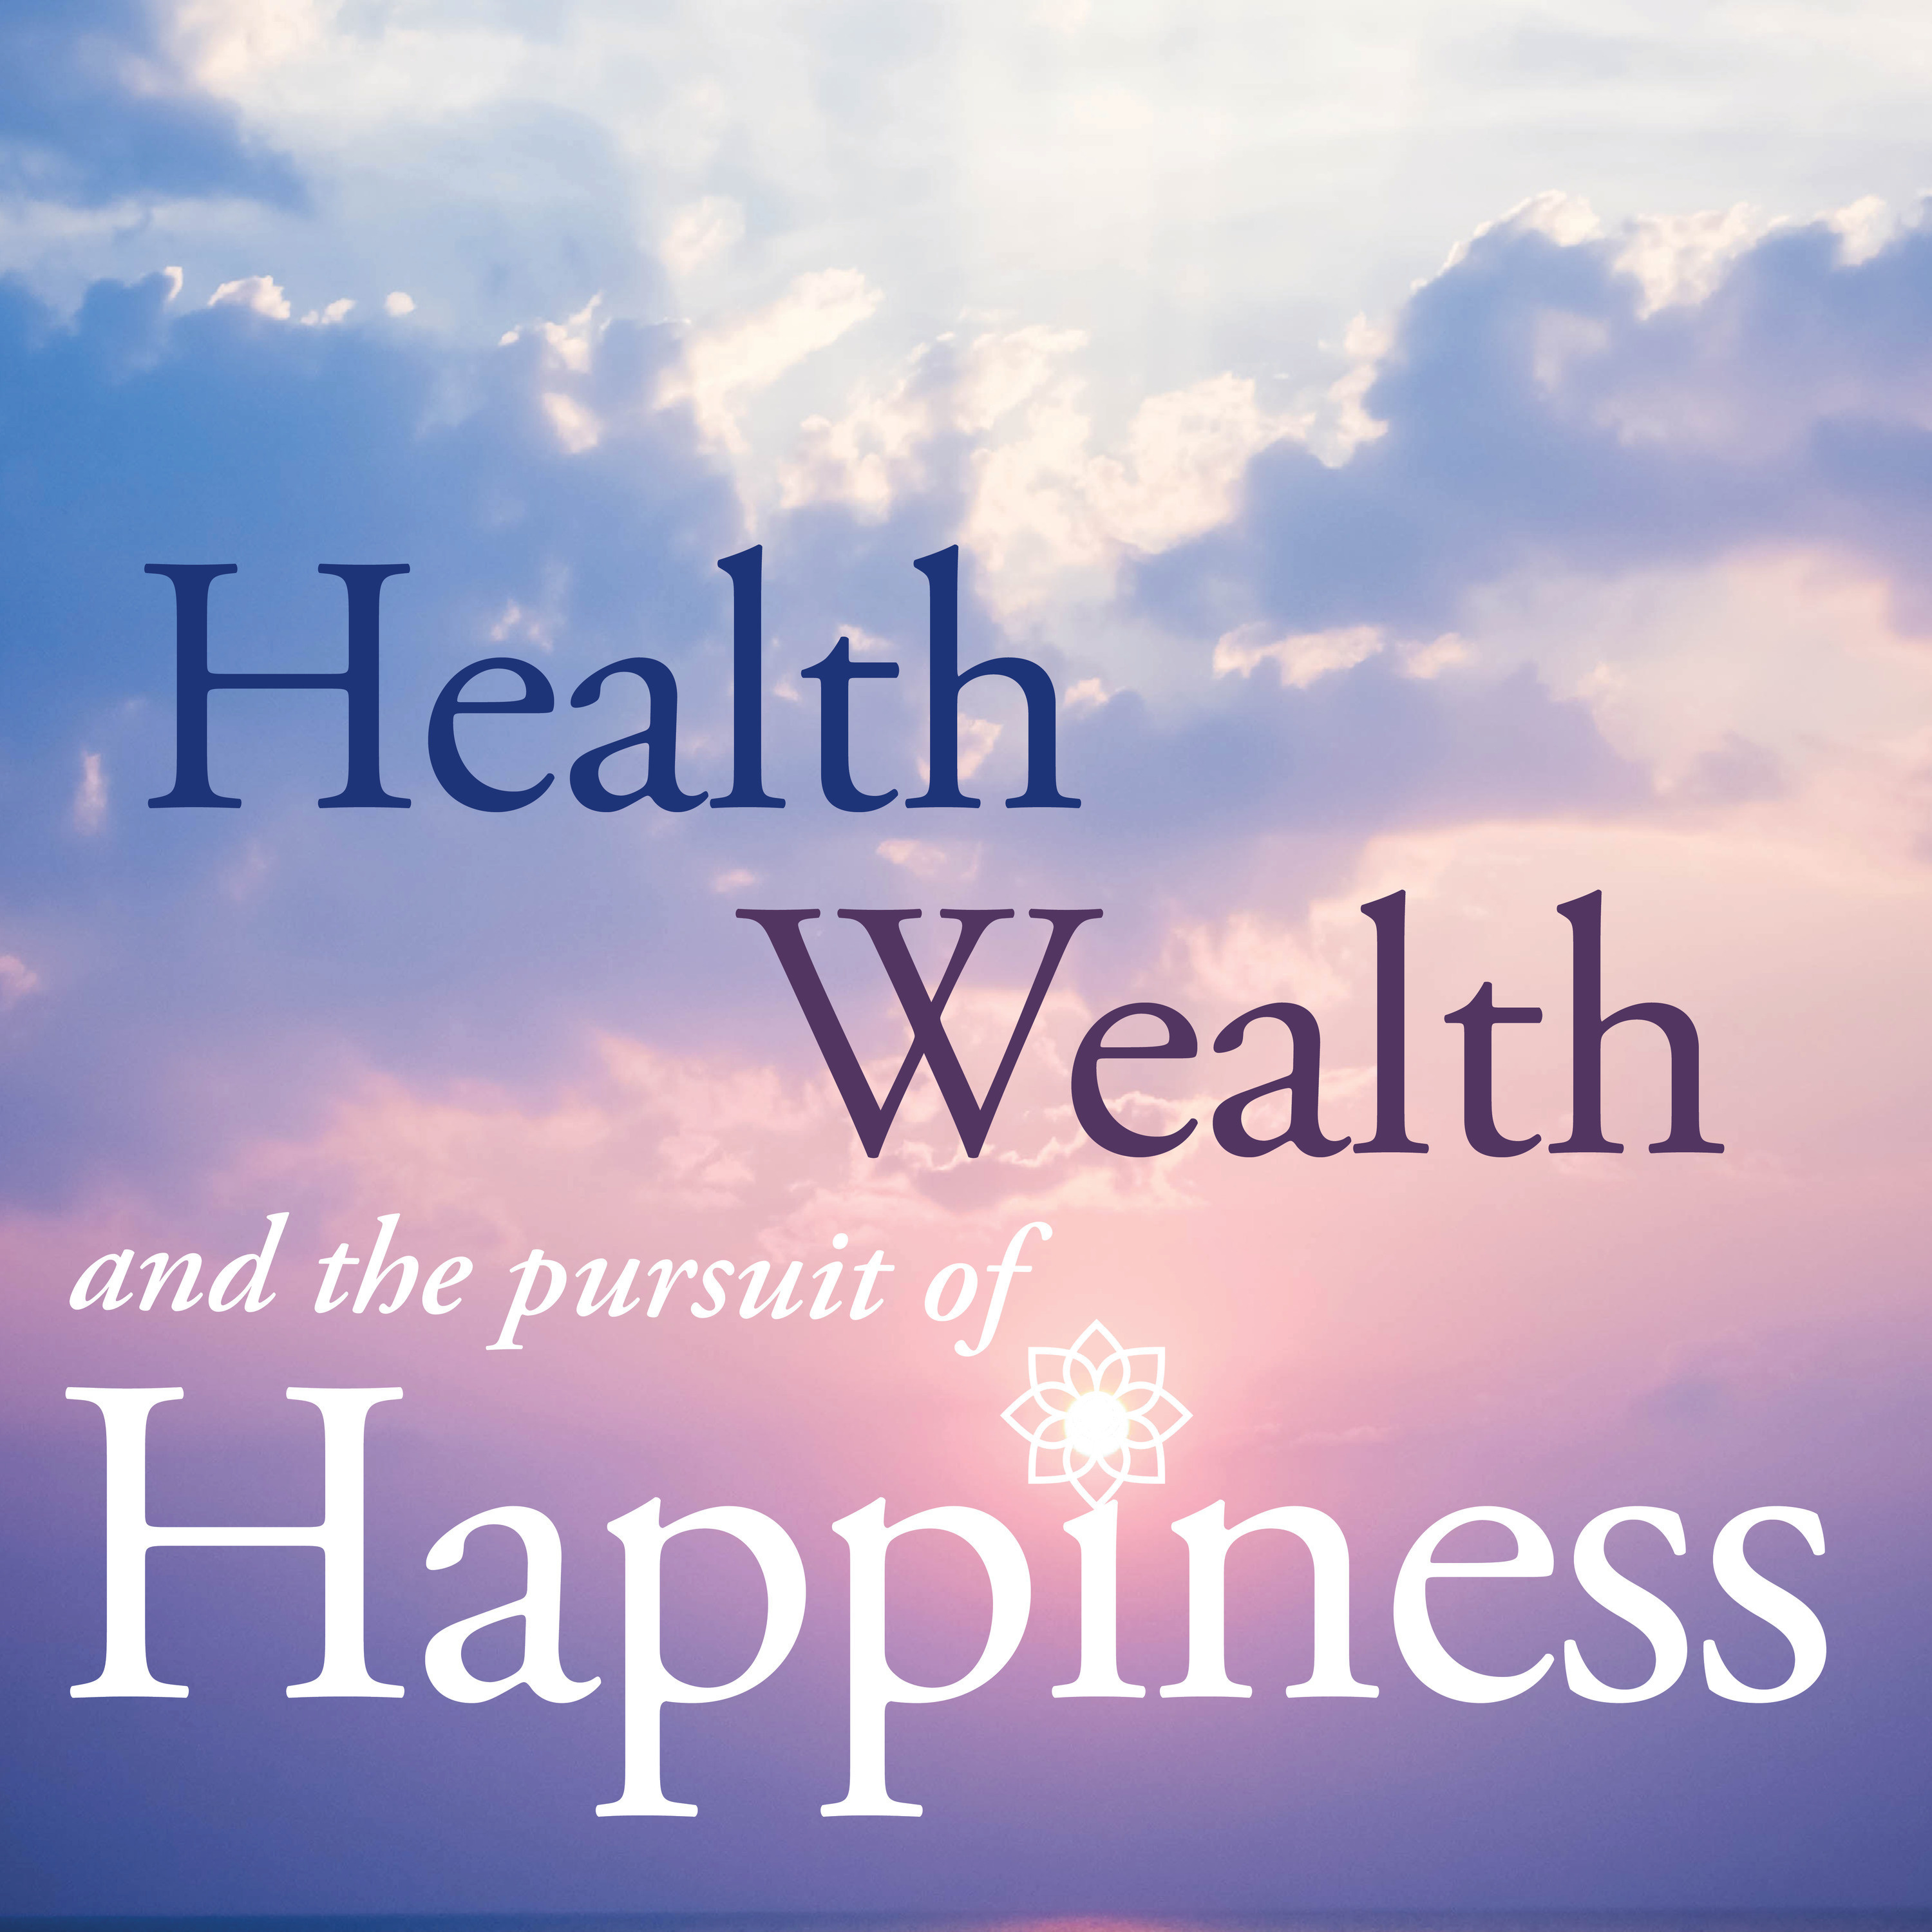 Health, Wealth and the Pursuit of Happiness